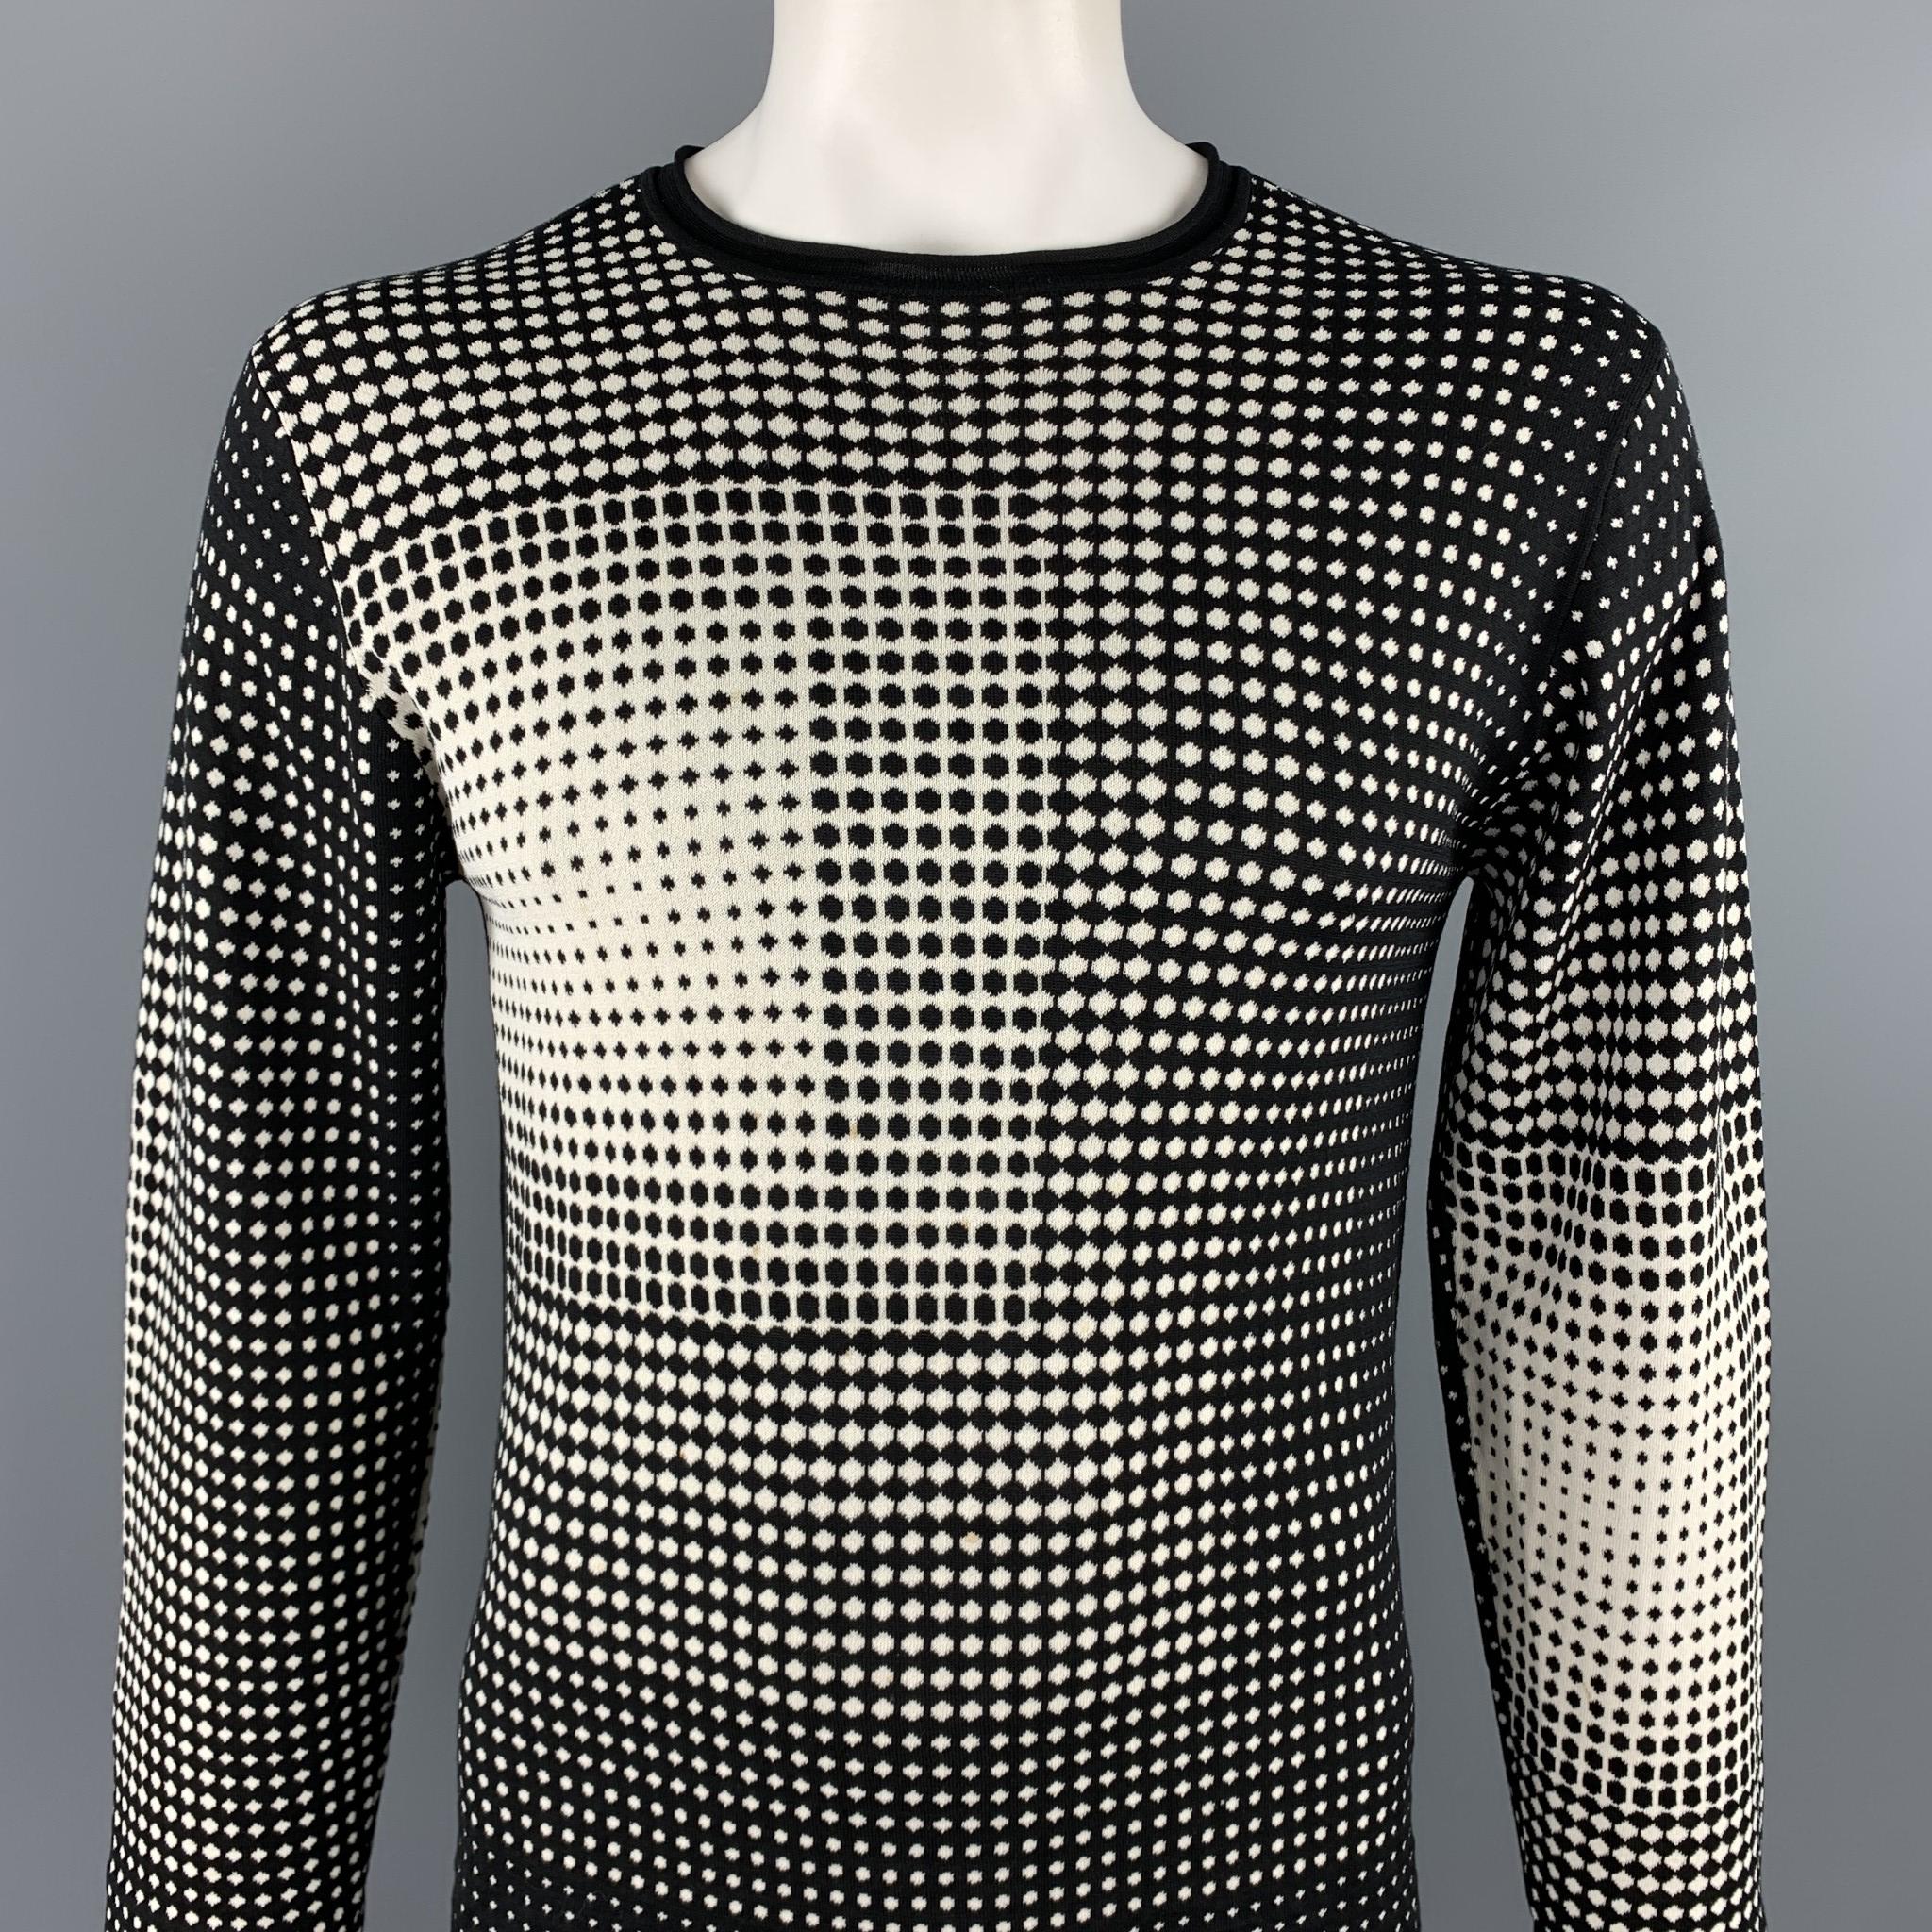 ARMANI COLLEZIONI pullover comes in a black & white geometric silk blend featuring a crew-neck.

Excellent Pre-Owned Condition.
Marked: L

Measurements:

Shoulder: 20 in. 
Chest: 40 in. 
Sleeve: 25.5 in. 
Length: 27 in. 